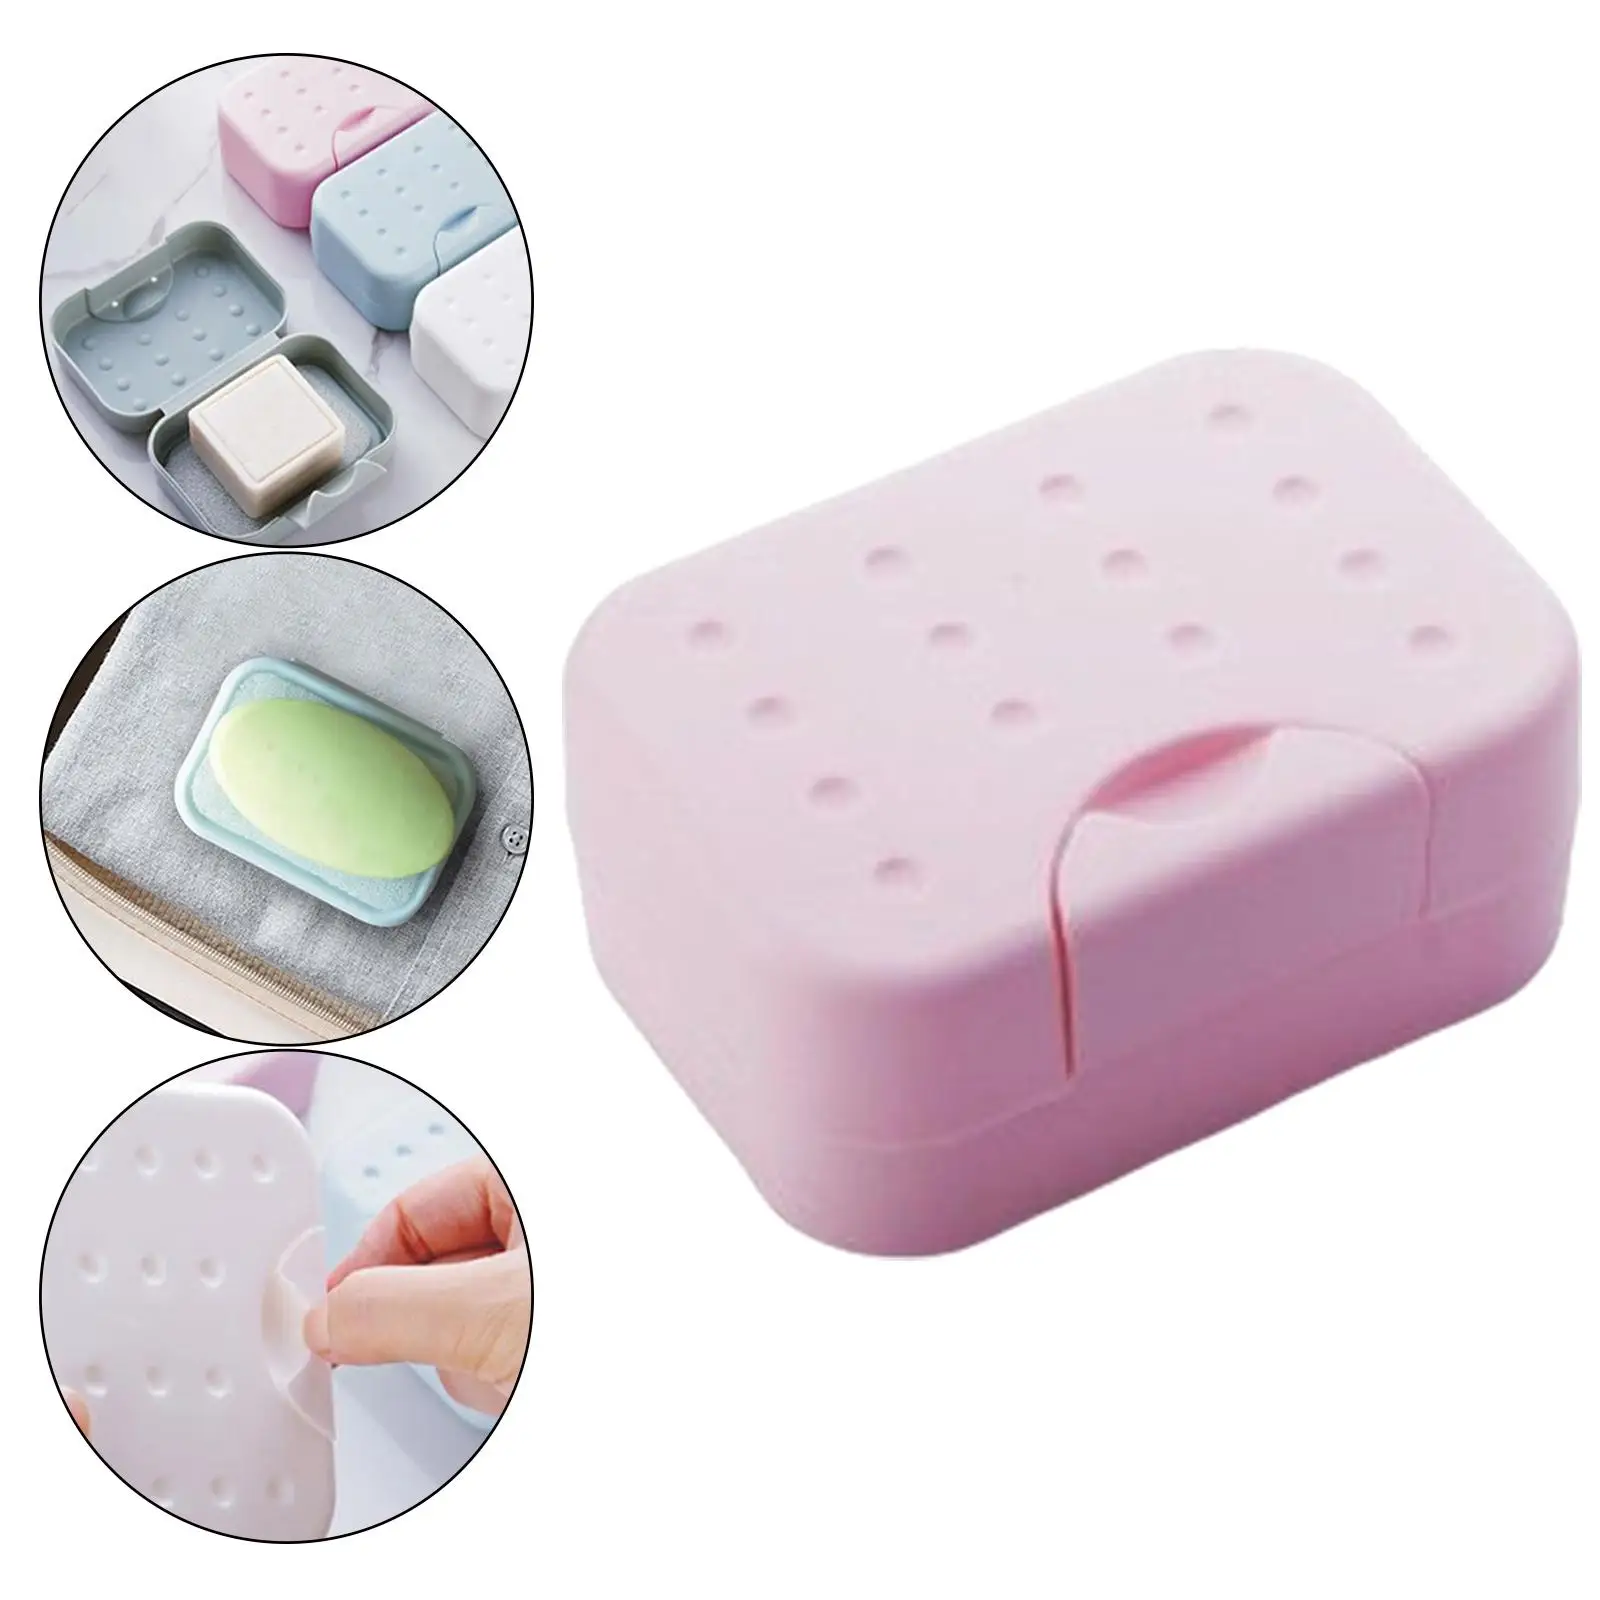 Portable Travel Soap Box Case Dish Container Soap Bar Holder for Hiking Bathroom Gym with Sponge Saver Sealed Waterproof